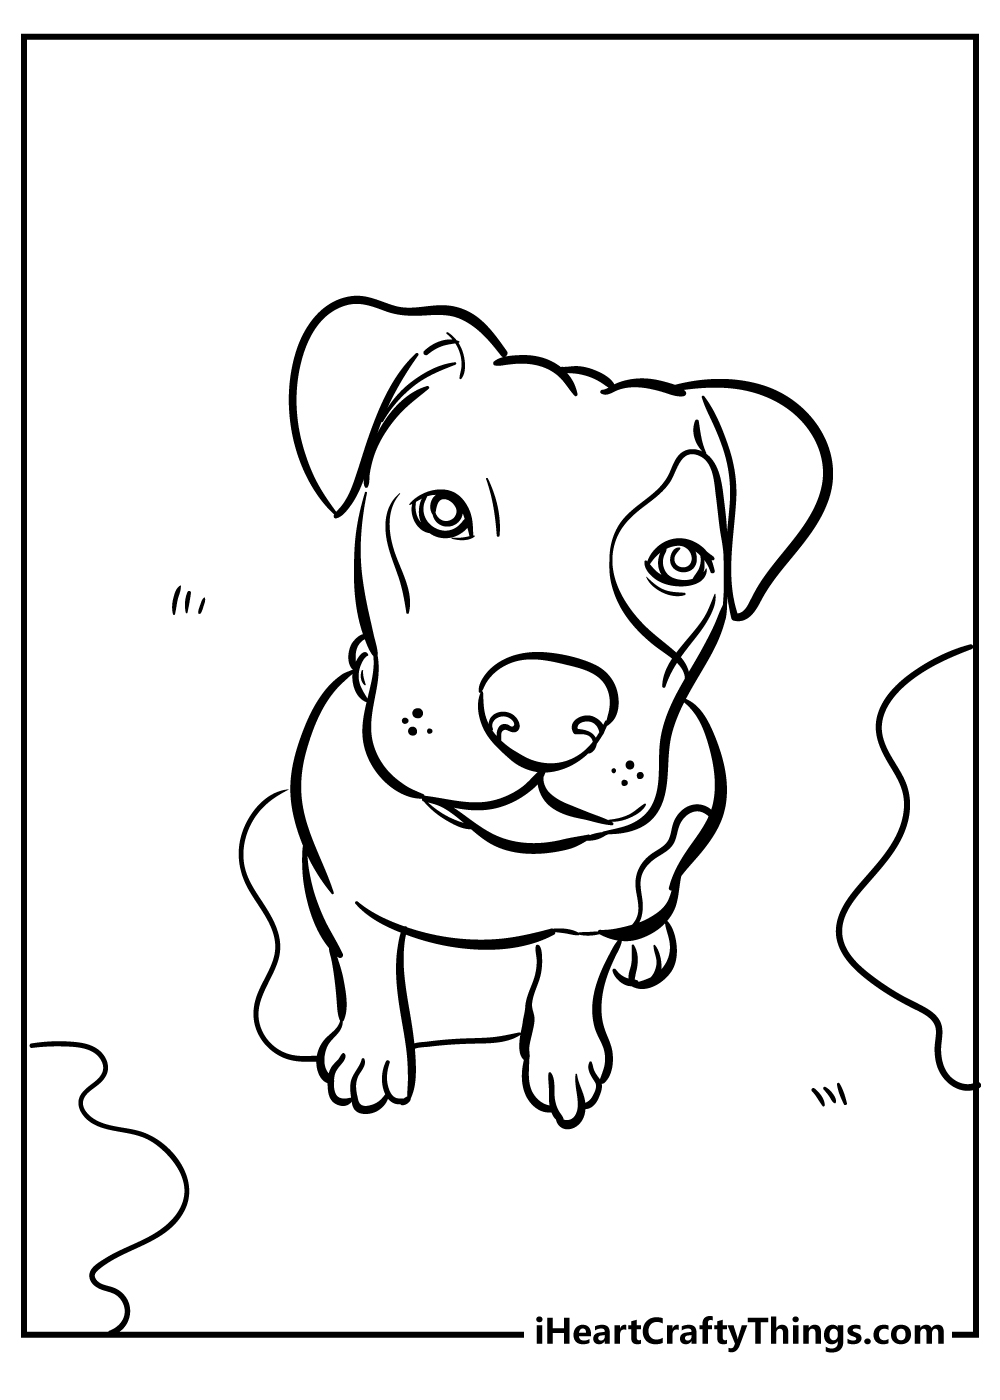 Dog coloring pages free printables